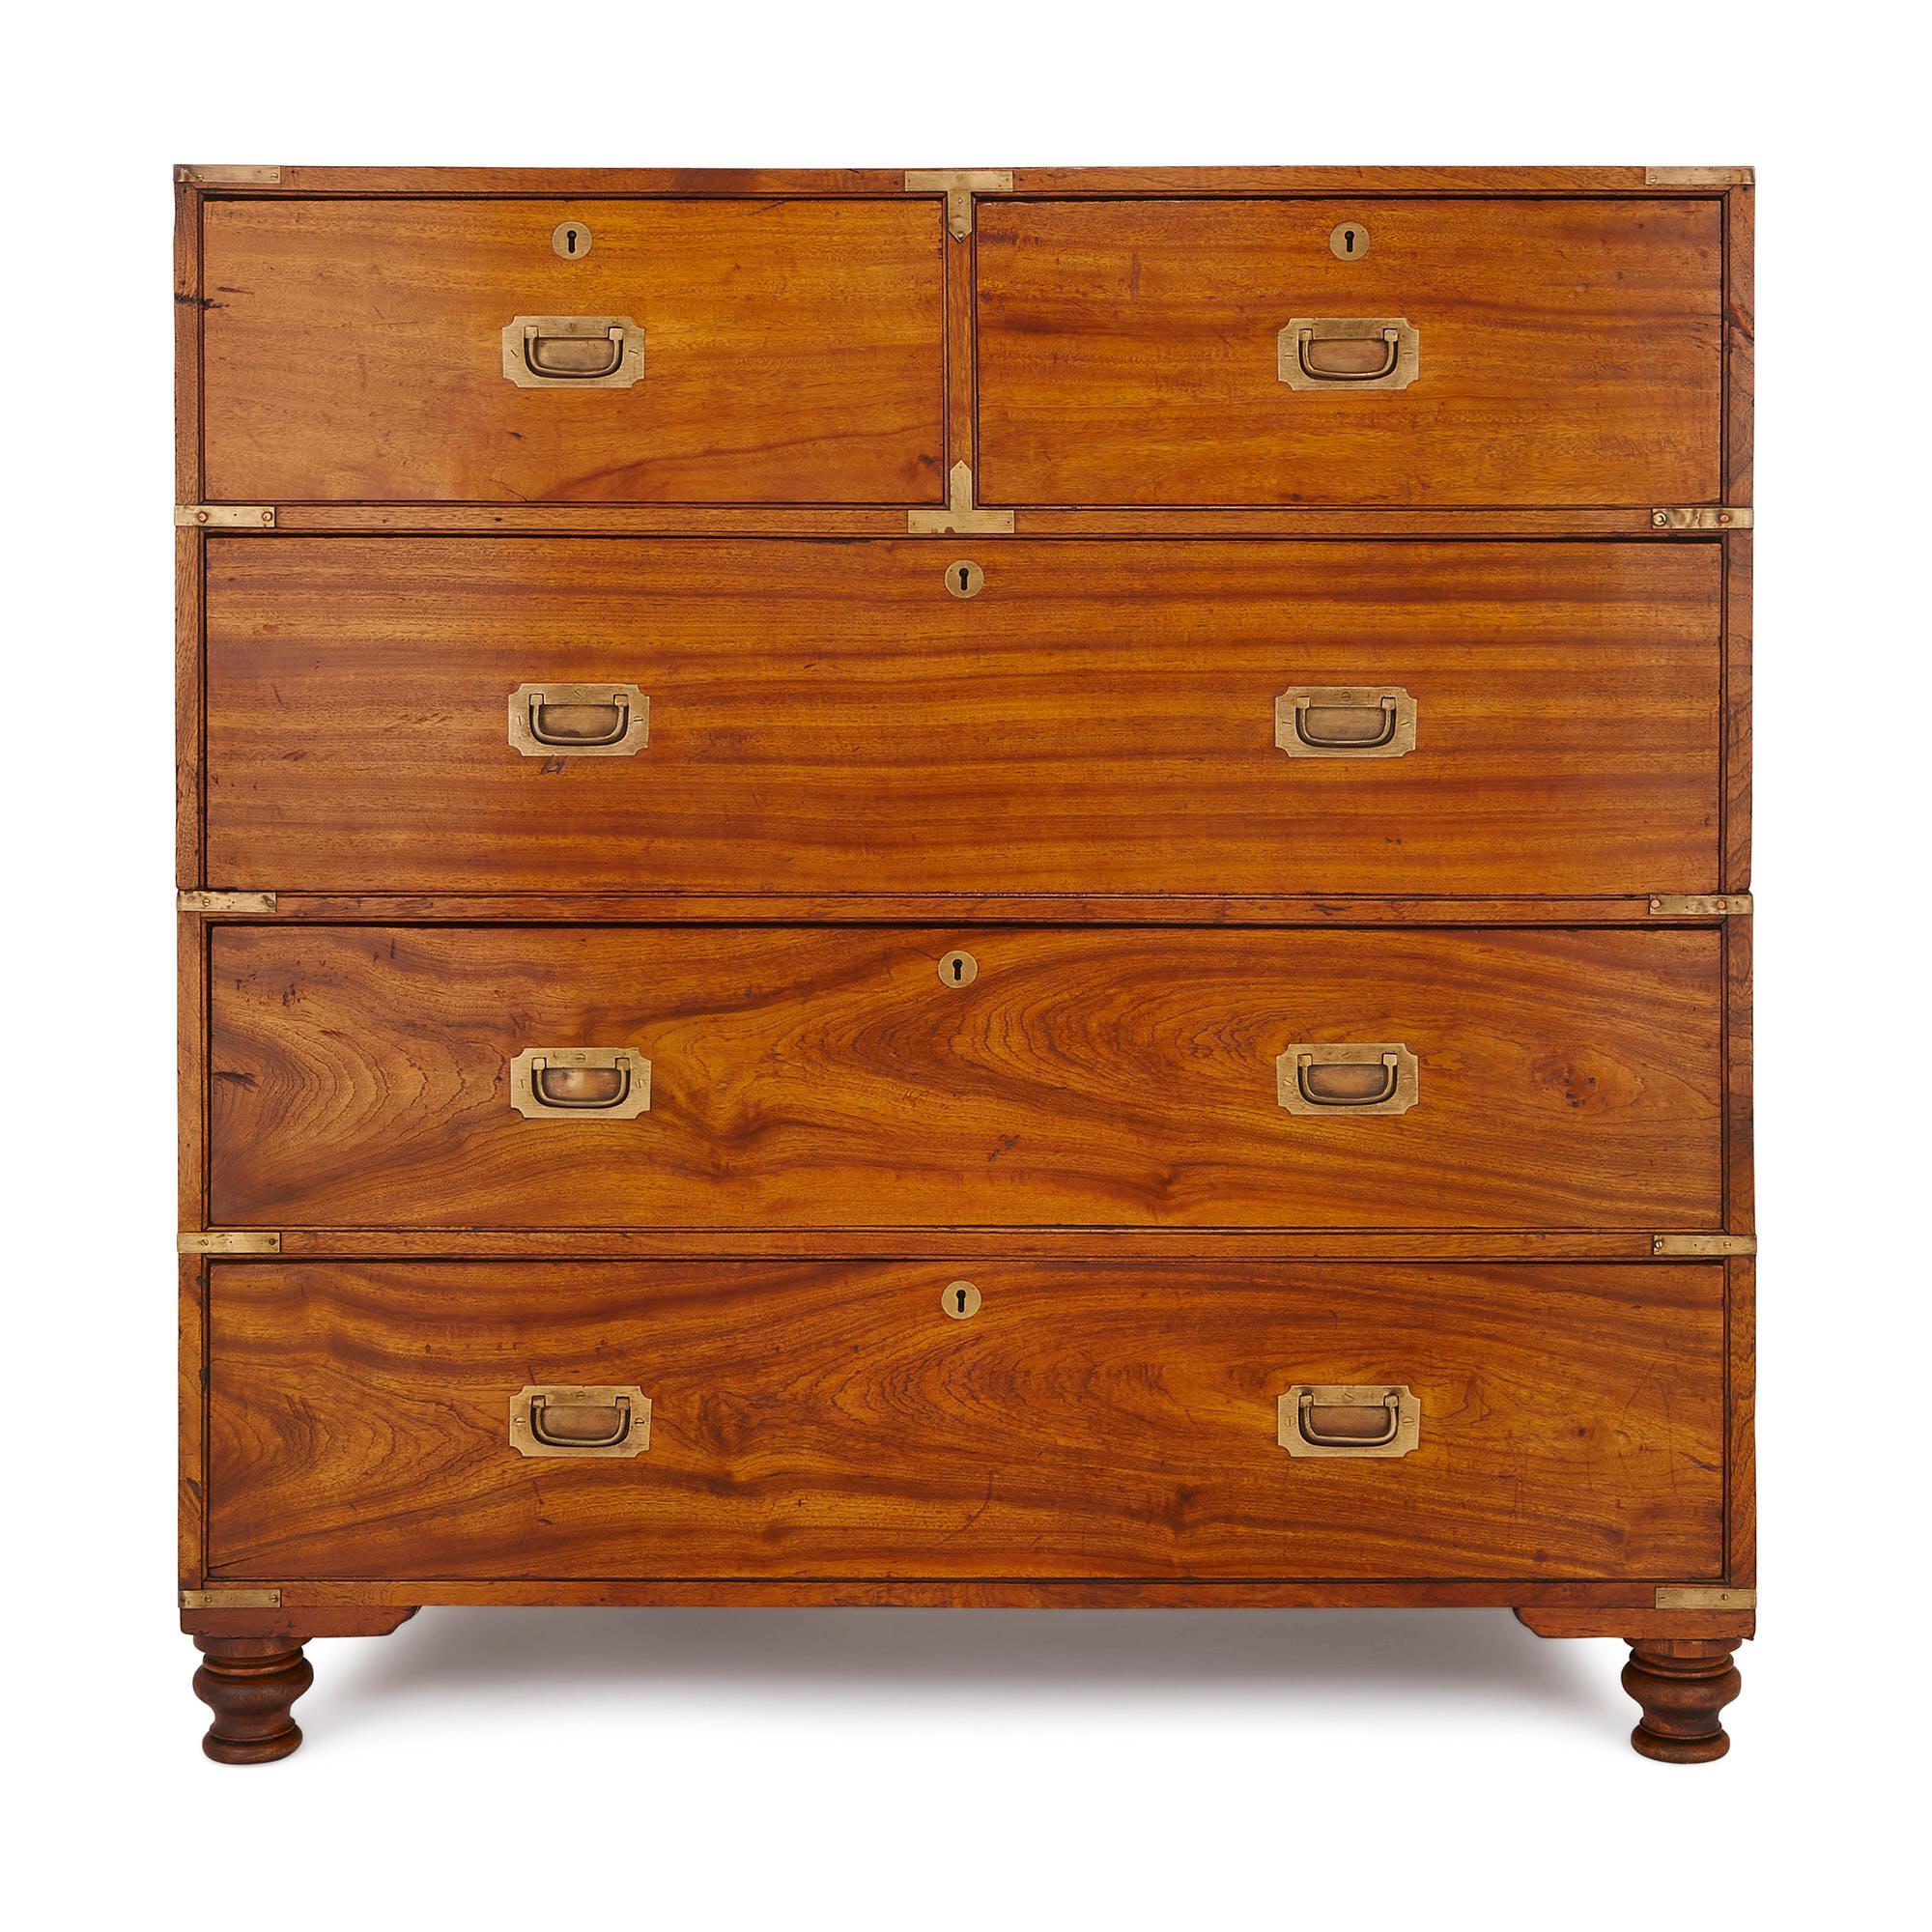 The chest is formed of five drawers, three long beneath two short, placed side by side. The chest is restrained in its style, with simple, sunken brass handles, brass corners and keyholes. On top of this, the the whole thing comes apart in two